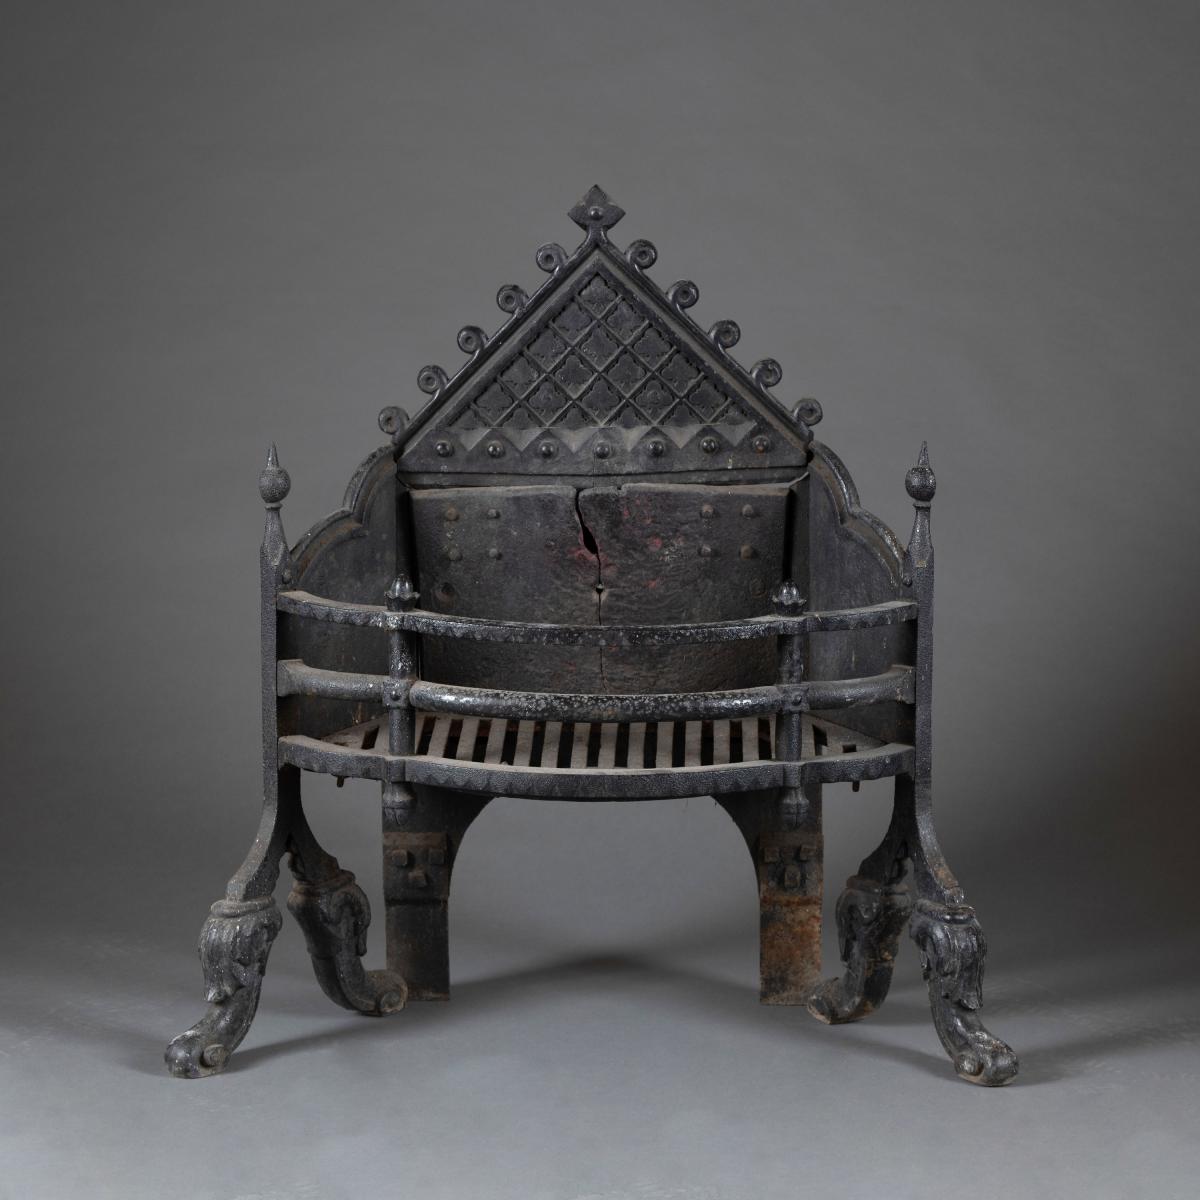 19th century English Gothic style wrought iron firegrate